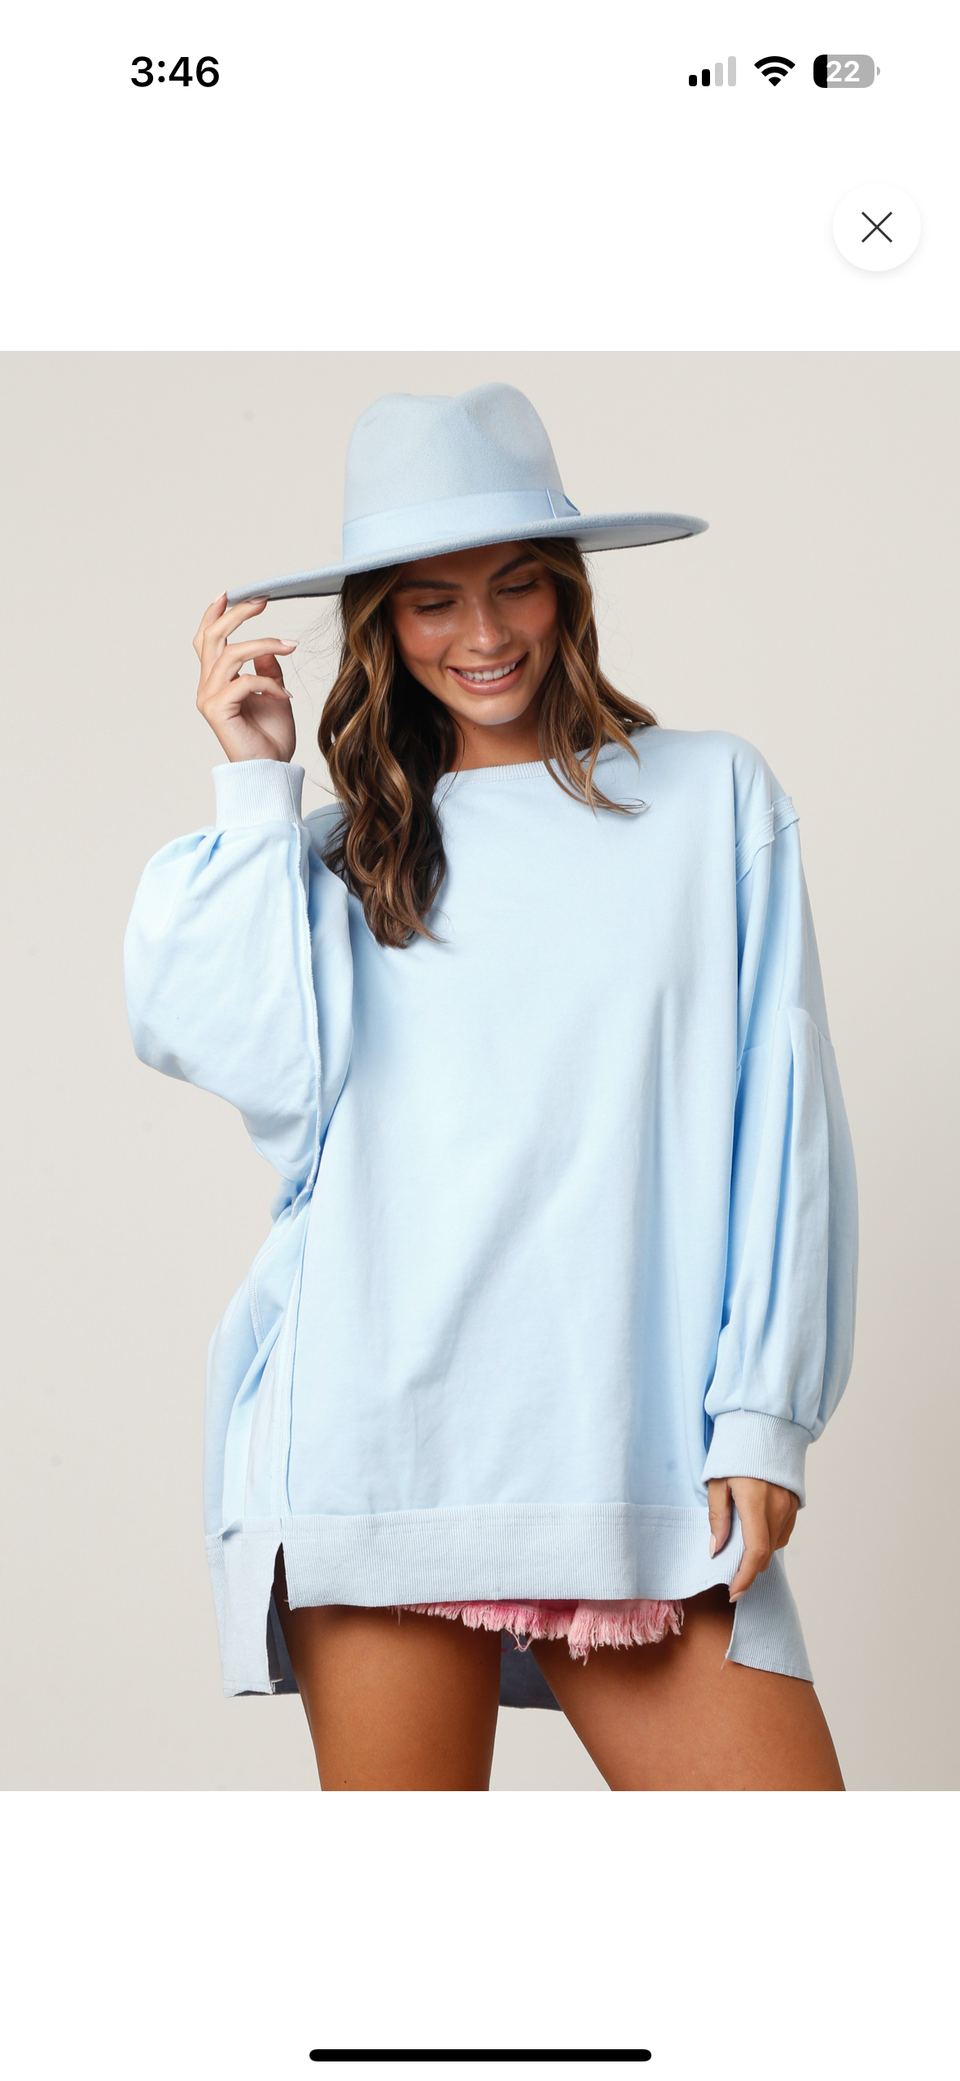 Oversized baby blue top